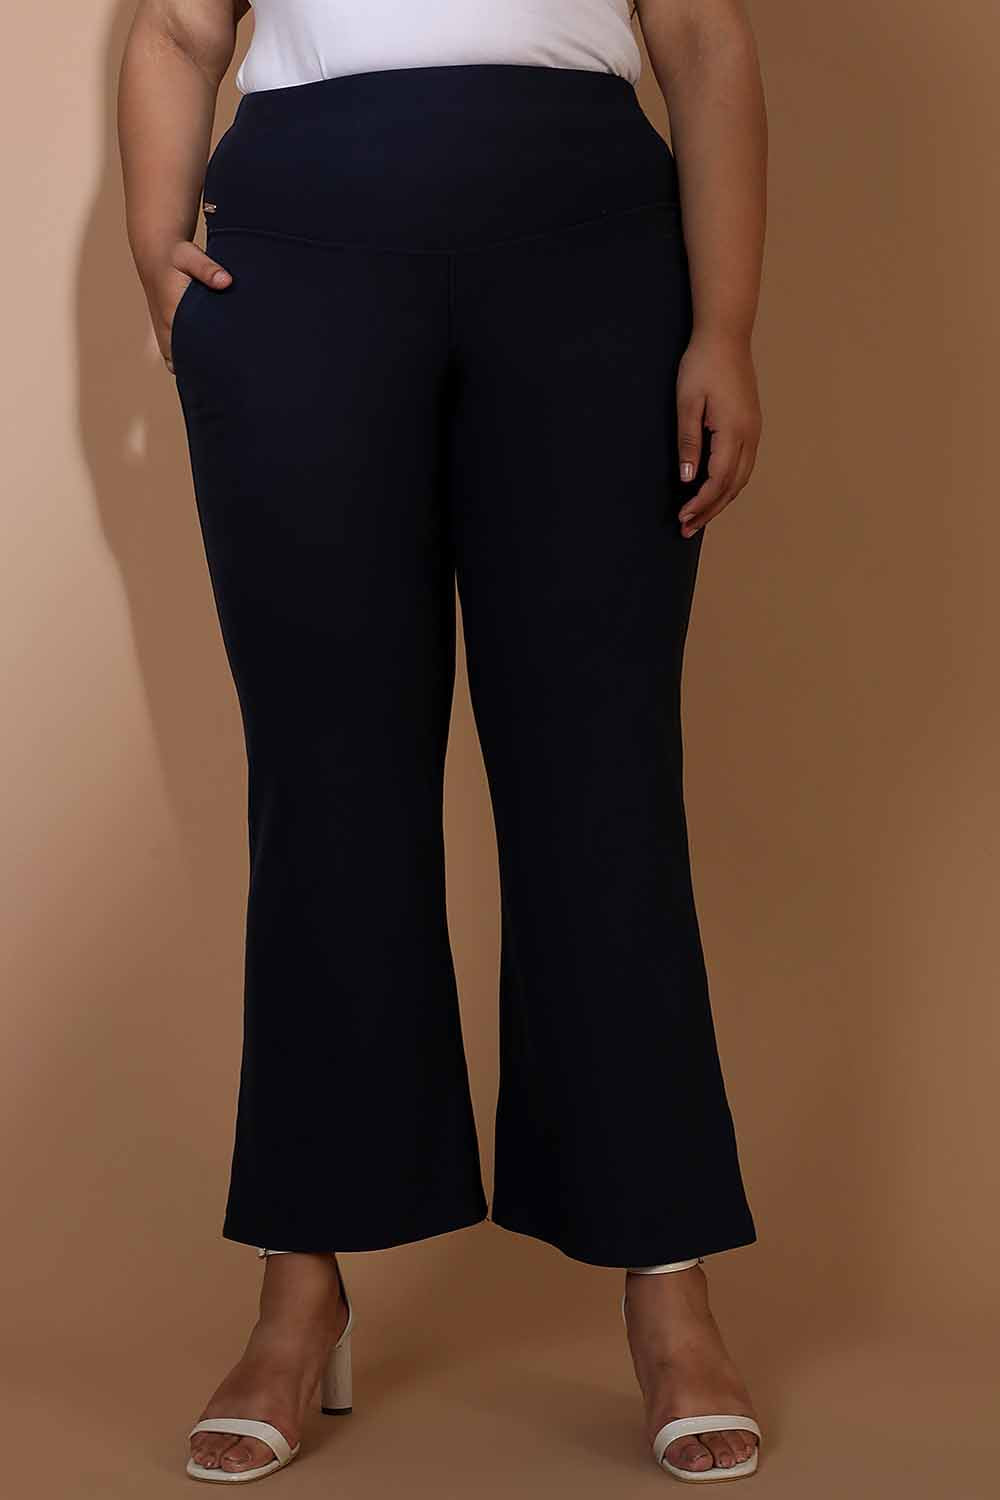 Plus Size Navy Tummy Shaper Bell Bottom Online in India